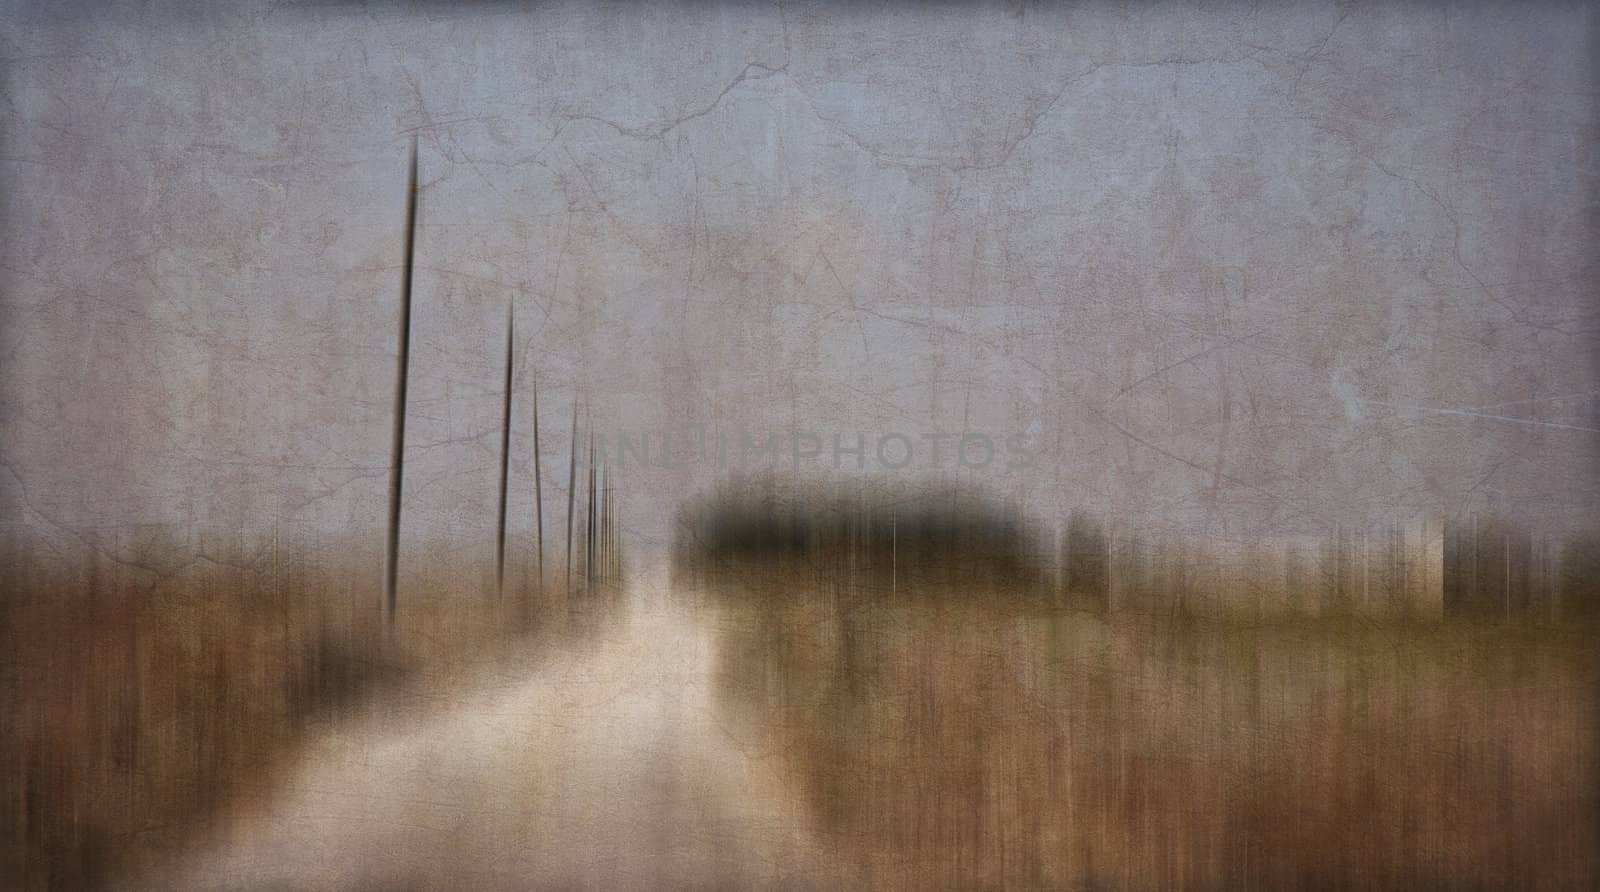 Dreaming back to my Italian summer residence at siesta time. Intentional motion blur. More of my photos worked together to reflect age and time.